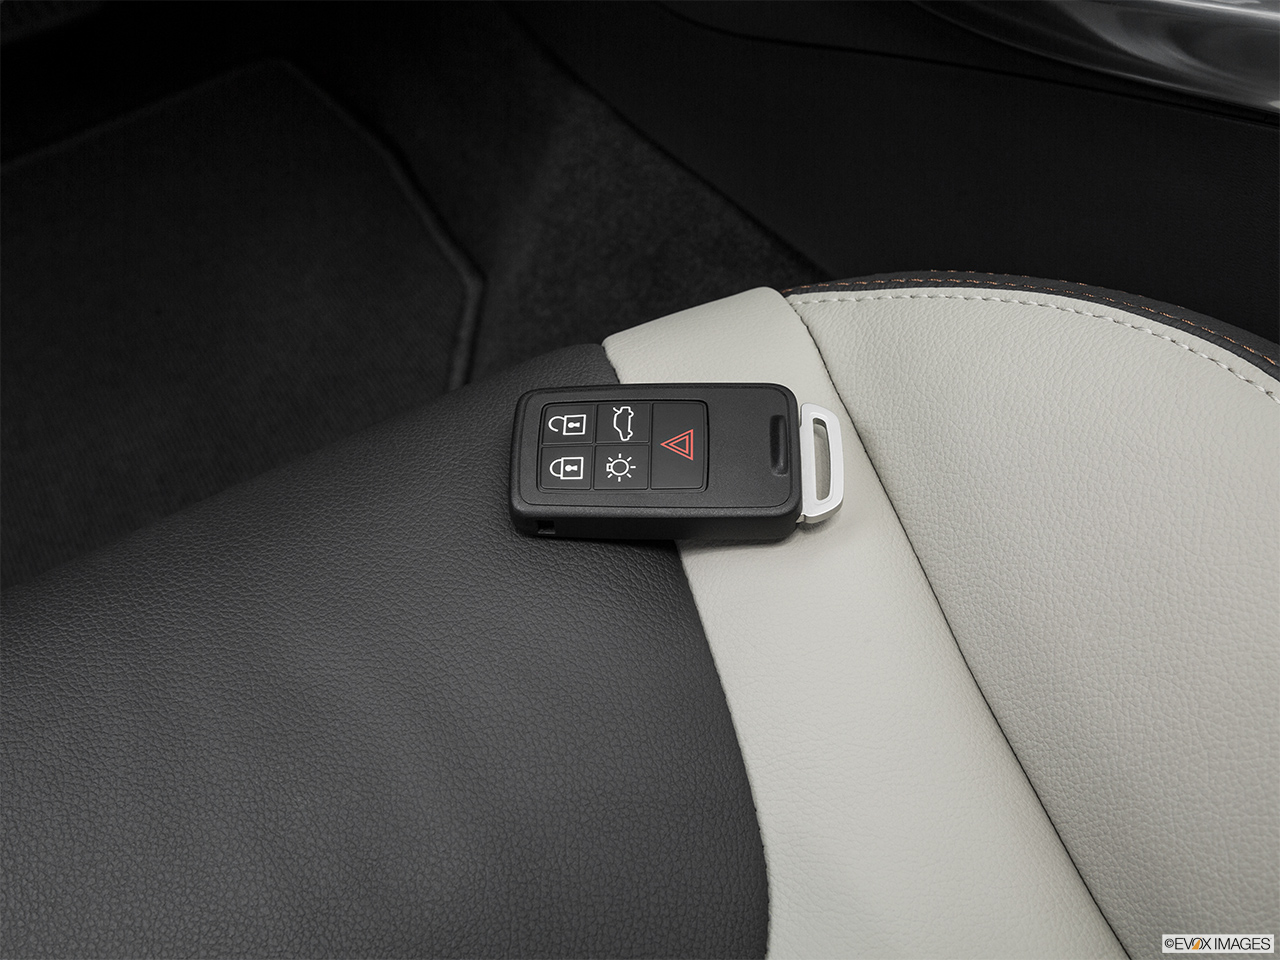 2016 Volvo S60 Cross Country T5 AWD Key fob on driver's seat. 